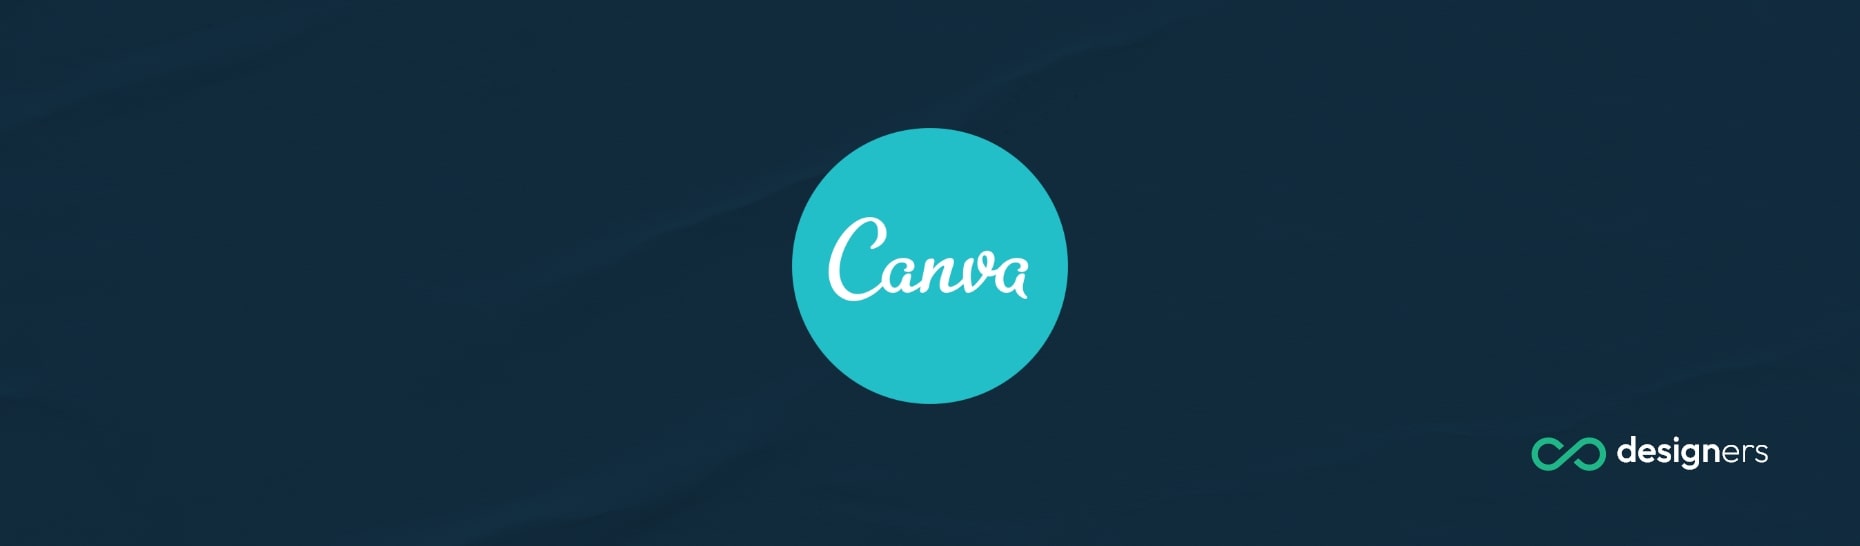 Is Canva Safe to Use?